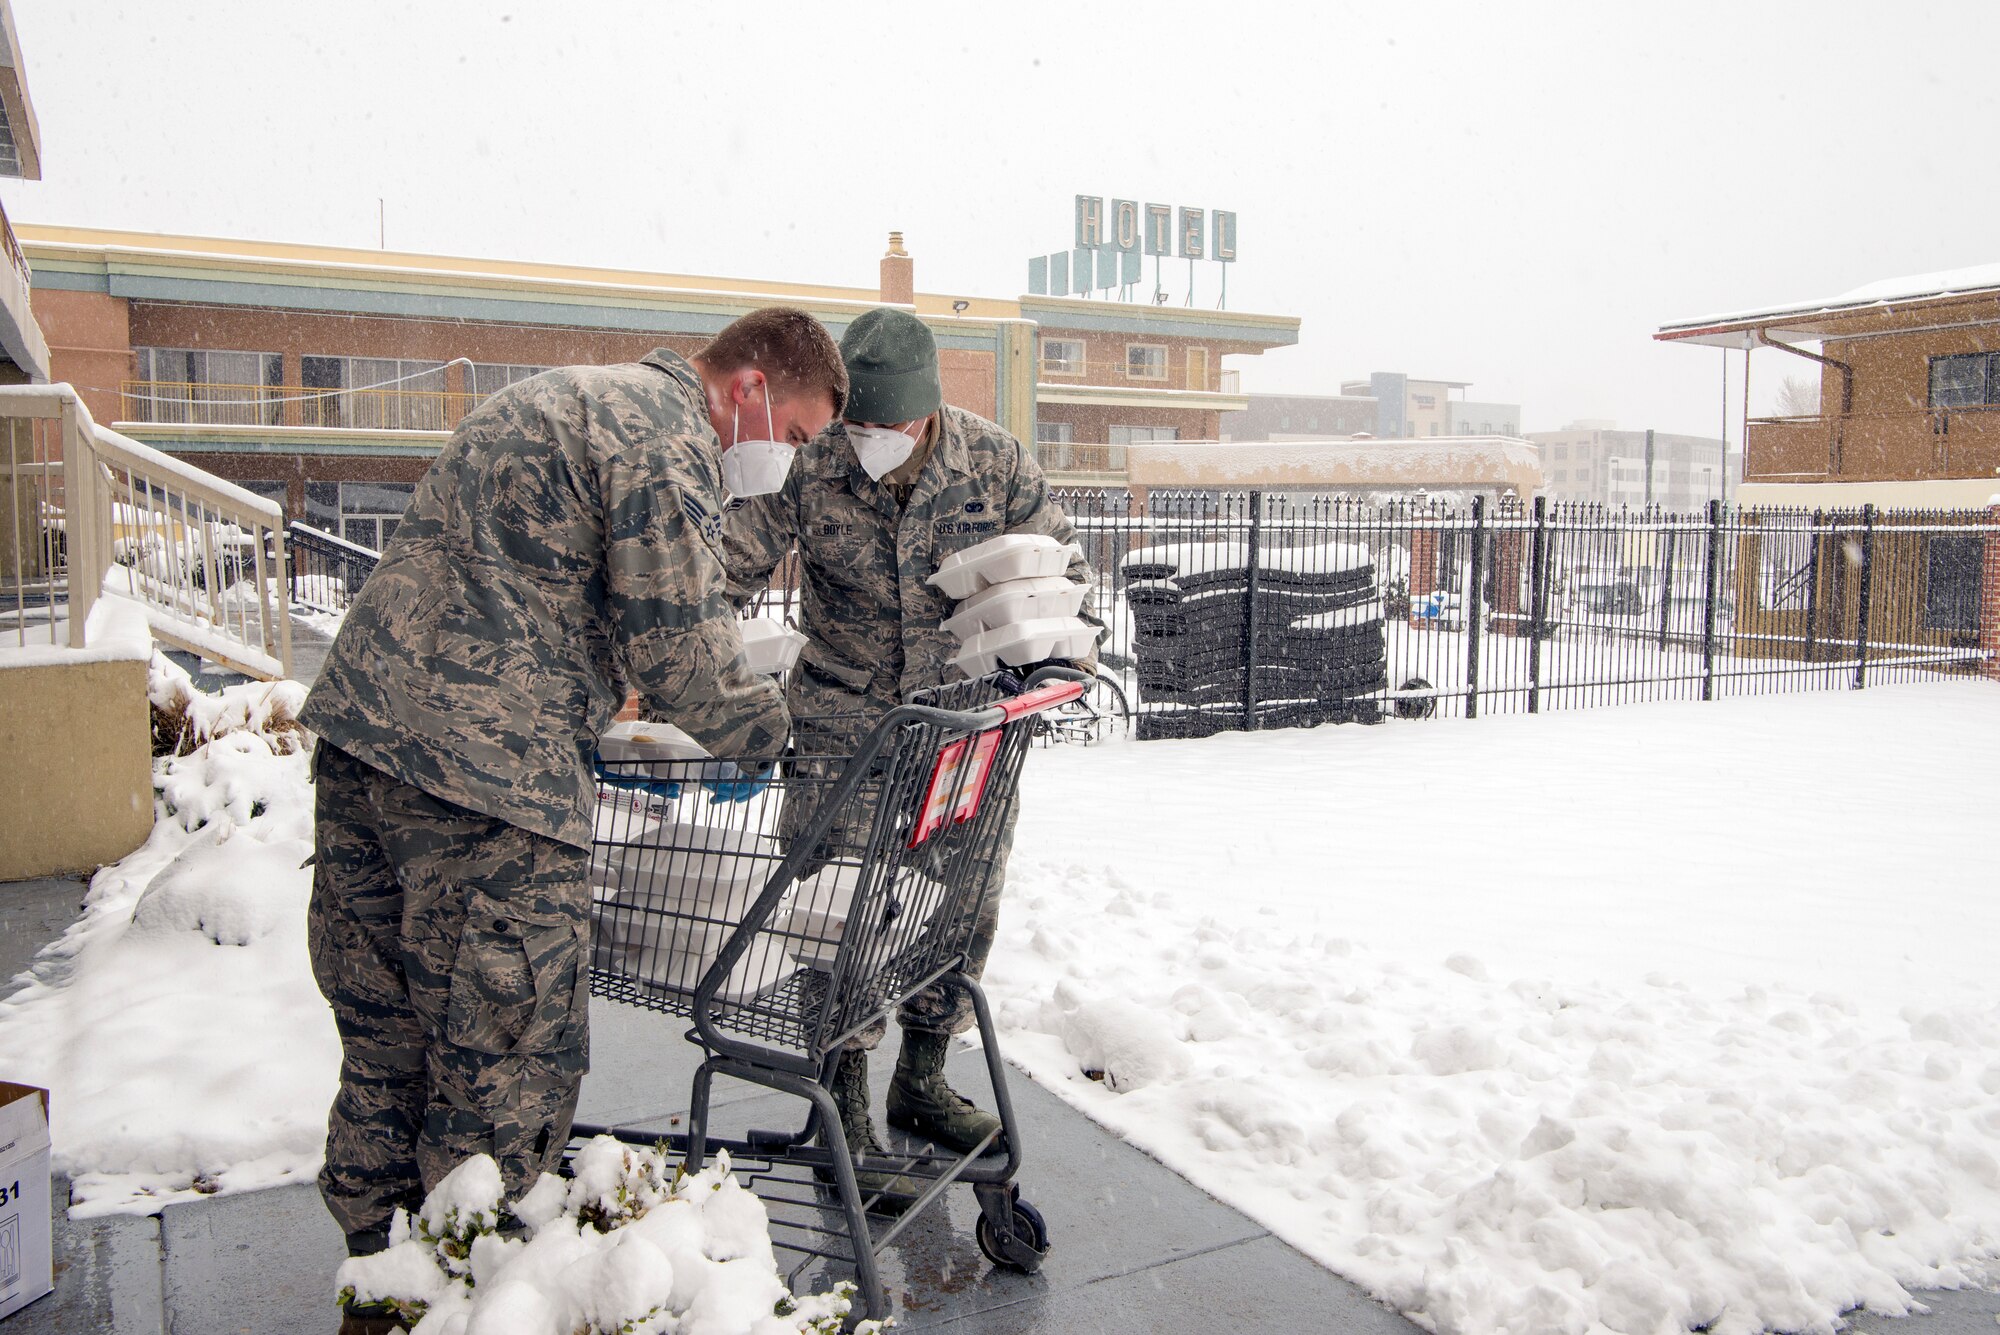 U.S. Air Force Senior Airman Konnor Ewing, a 140th Wing, Colorado Air National Guard aircraft structural maintenance mechanic, and Airman 1st Class John Boyle, 233rd Space Group security forces specialists in Greeley Colo., deliver meals to guests at a hotel in Denver, April 16, 2020.  Members of the Colorado National Guard have been brought on to serve in one of a multitude of task forces including helping those who otherwise would not have a place to stay during COVID 19. Troops are deployed around the state in various capacities to support state and local officials combat the Corona Virus Pandemic. (U.S. Air National Guard photo by Senior Master Sgt. John Rohrer)